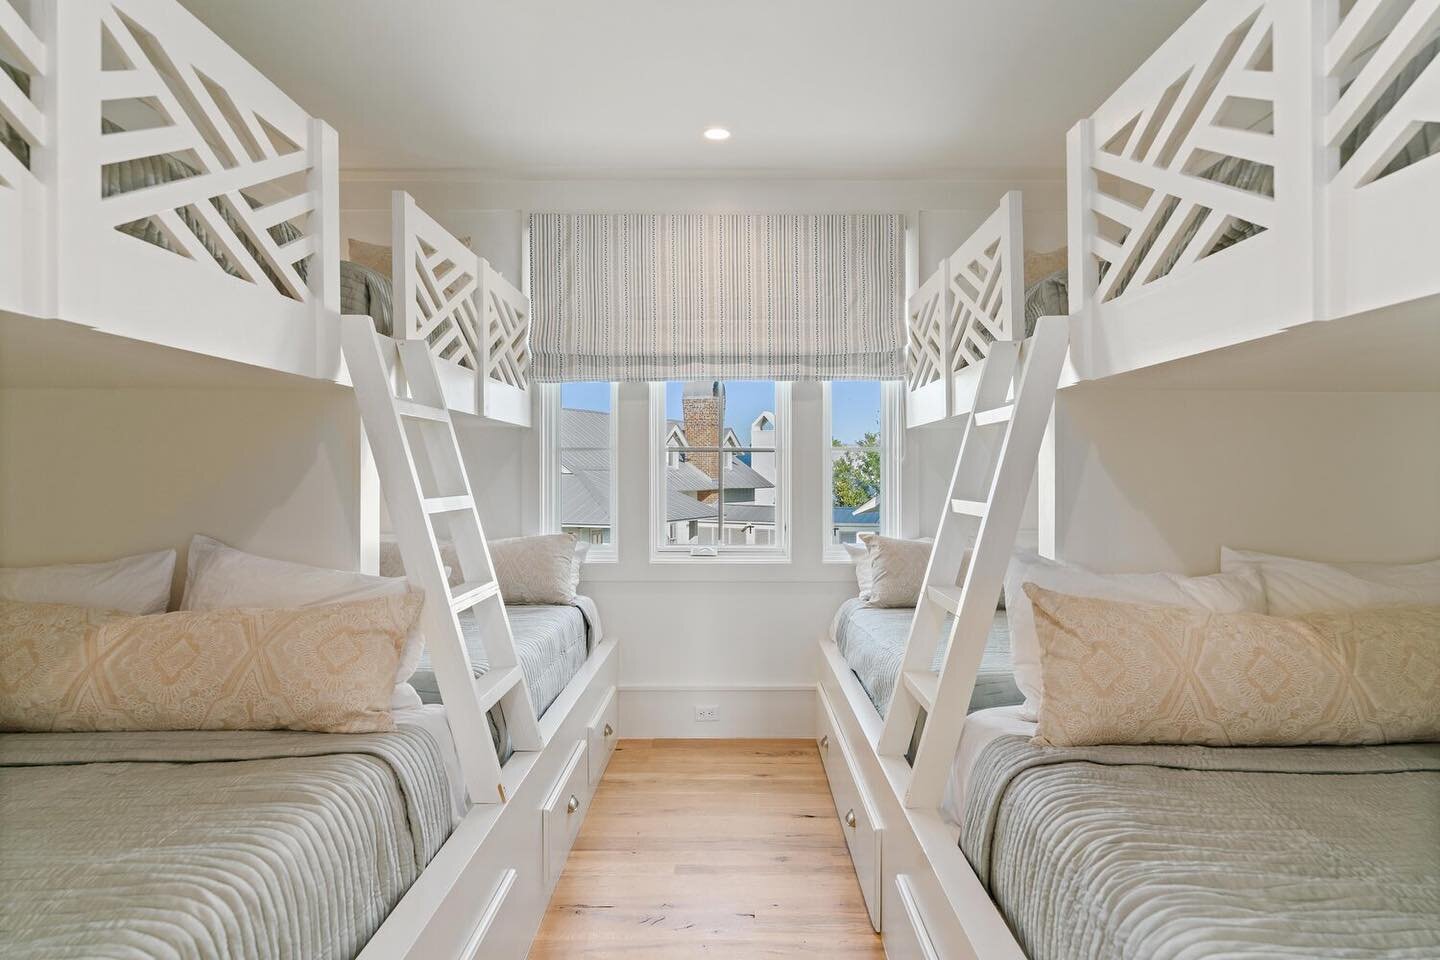 The perfect vacation kid bunk room! Can you imagine the laughter coming from this room?